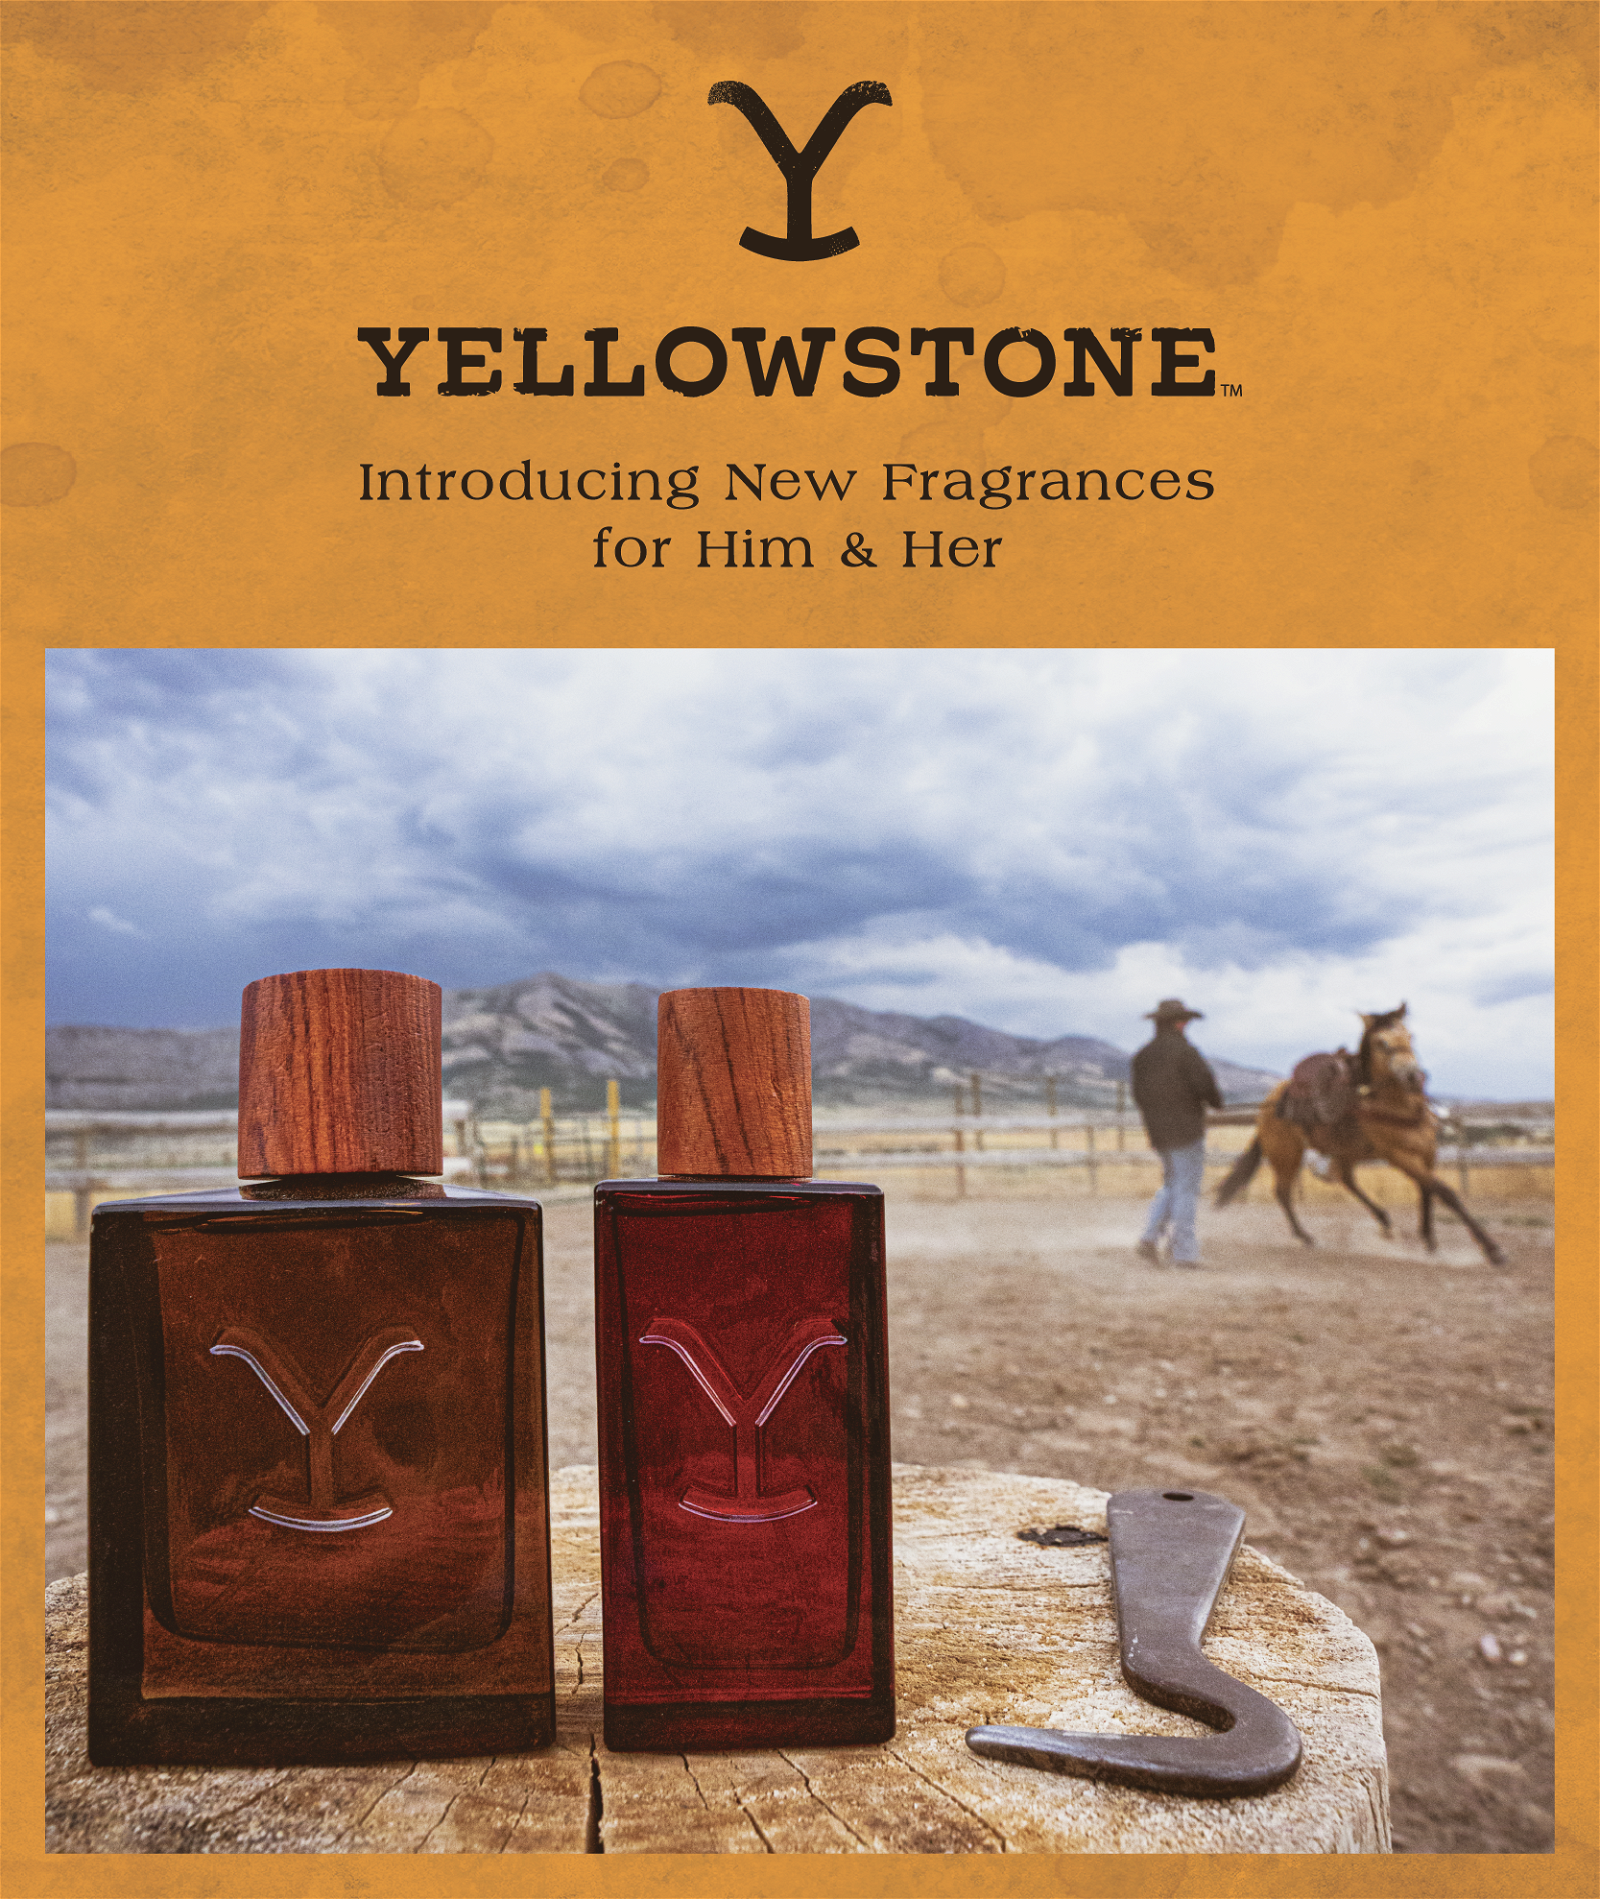 Yellowstone introducing new fragrance for him & her